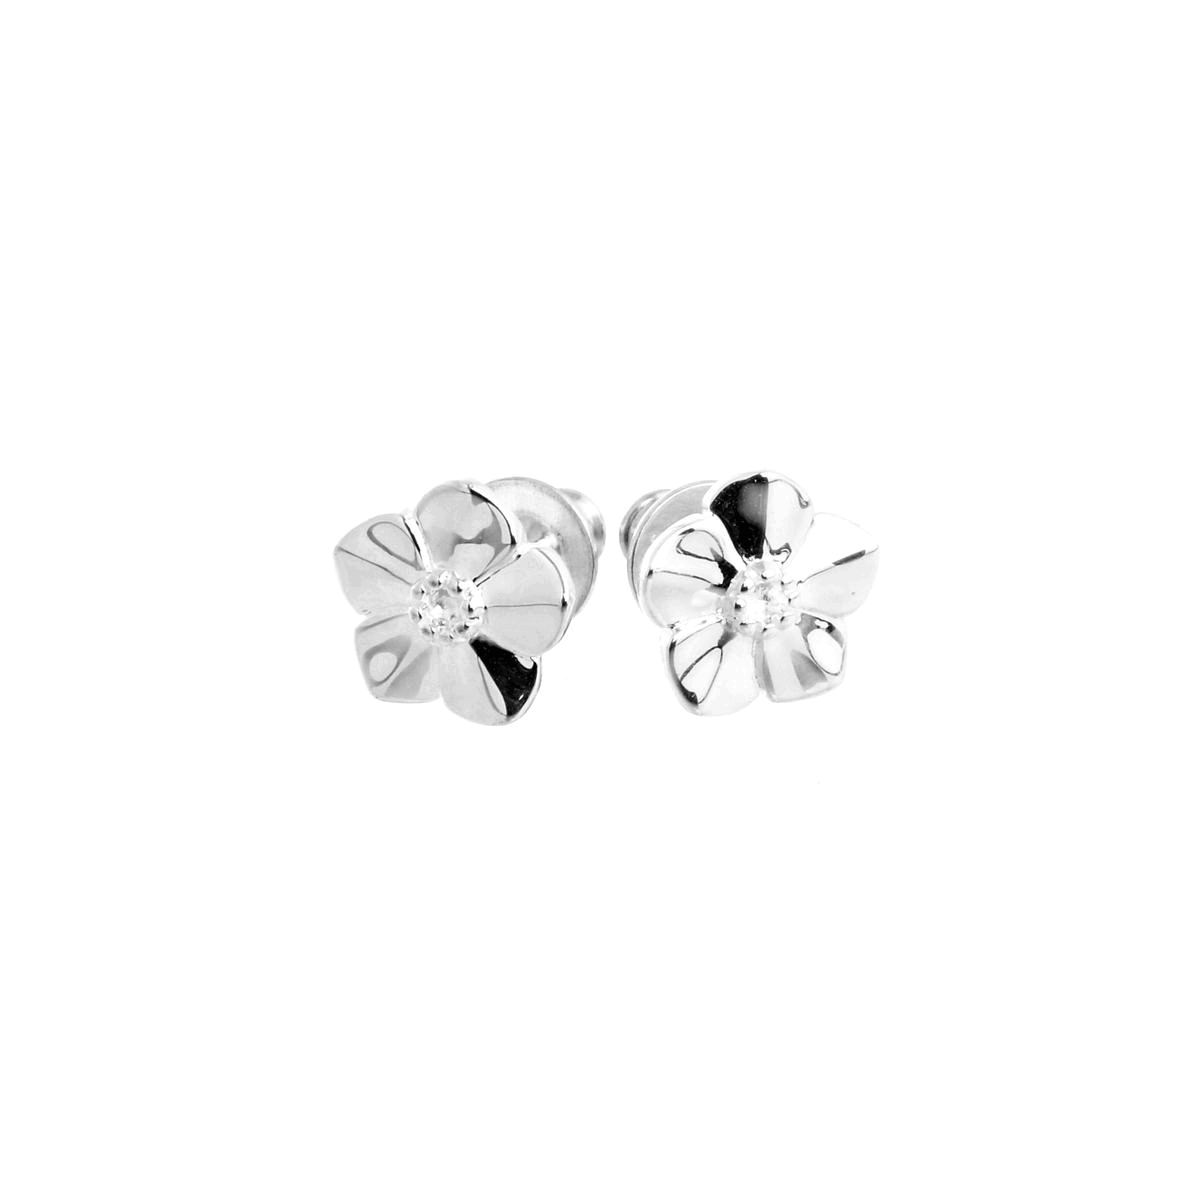 Forget-Me-Not Silver Stud Earrings gift for remembrance and loss from Scarlett Jewellery